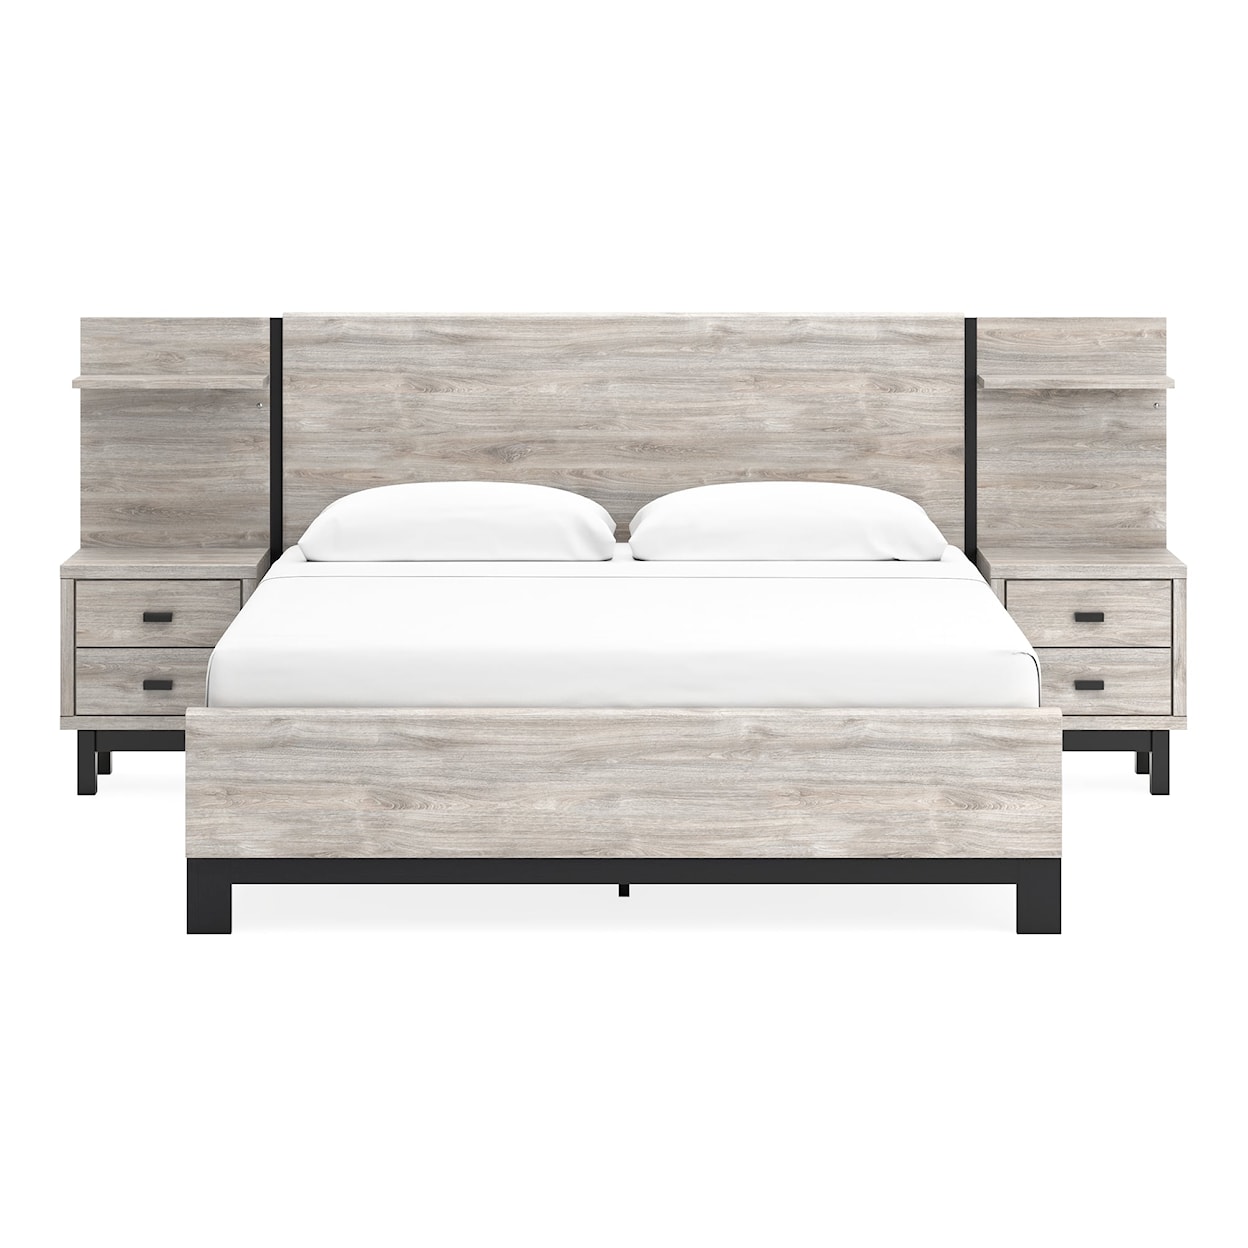 JB King Vessalli King Panel Bed with Extensions